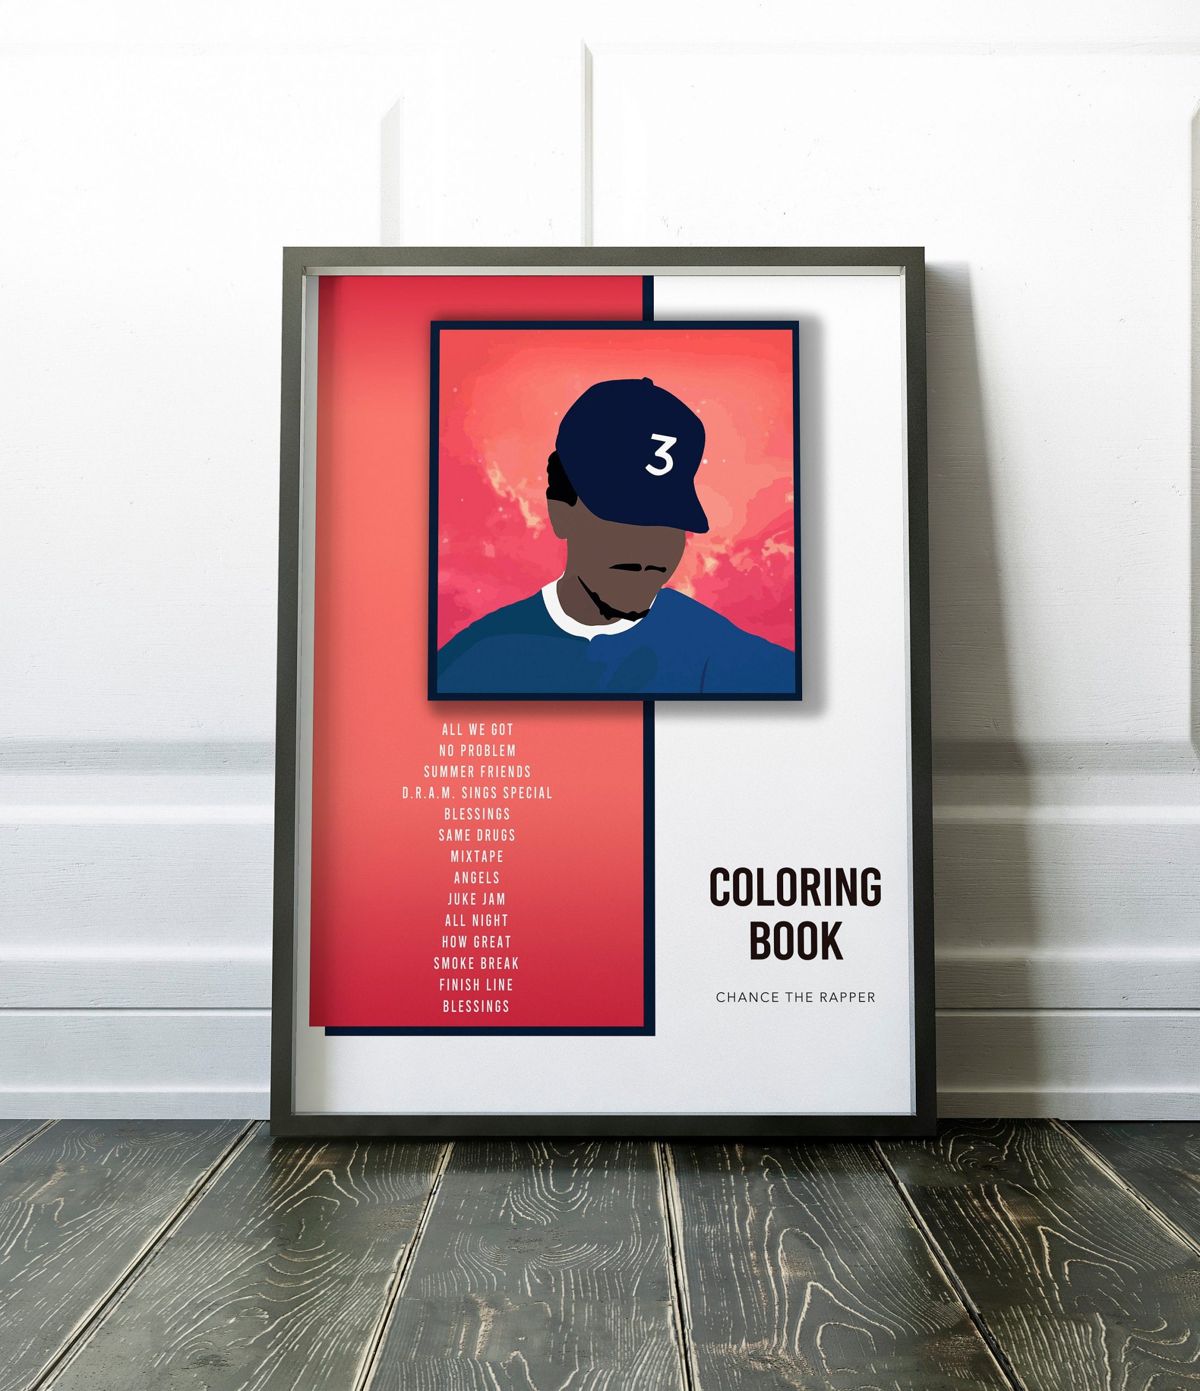 Download Coloring Book Tracklist - Chance The Rapper Album Cover - Poster - Canvas Print - Wooden Hanging ...